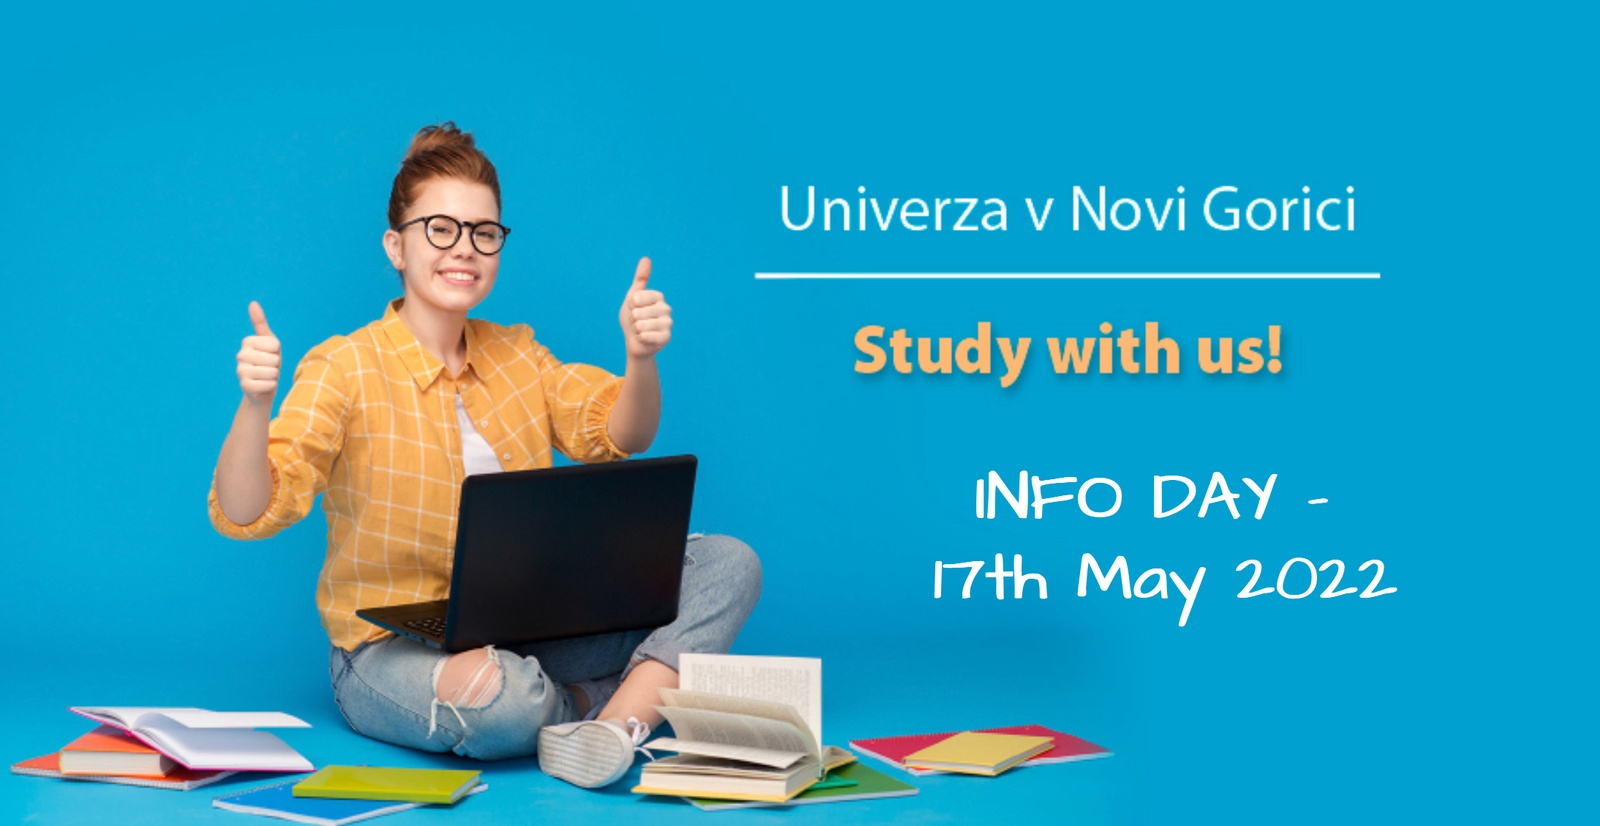 Information Day, 17th May 2022